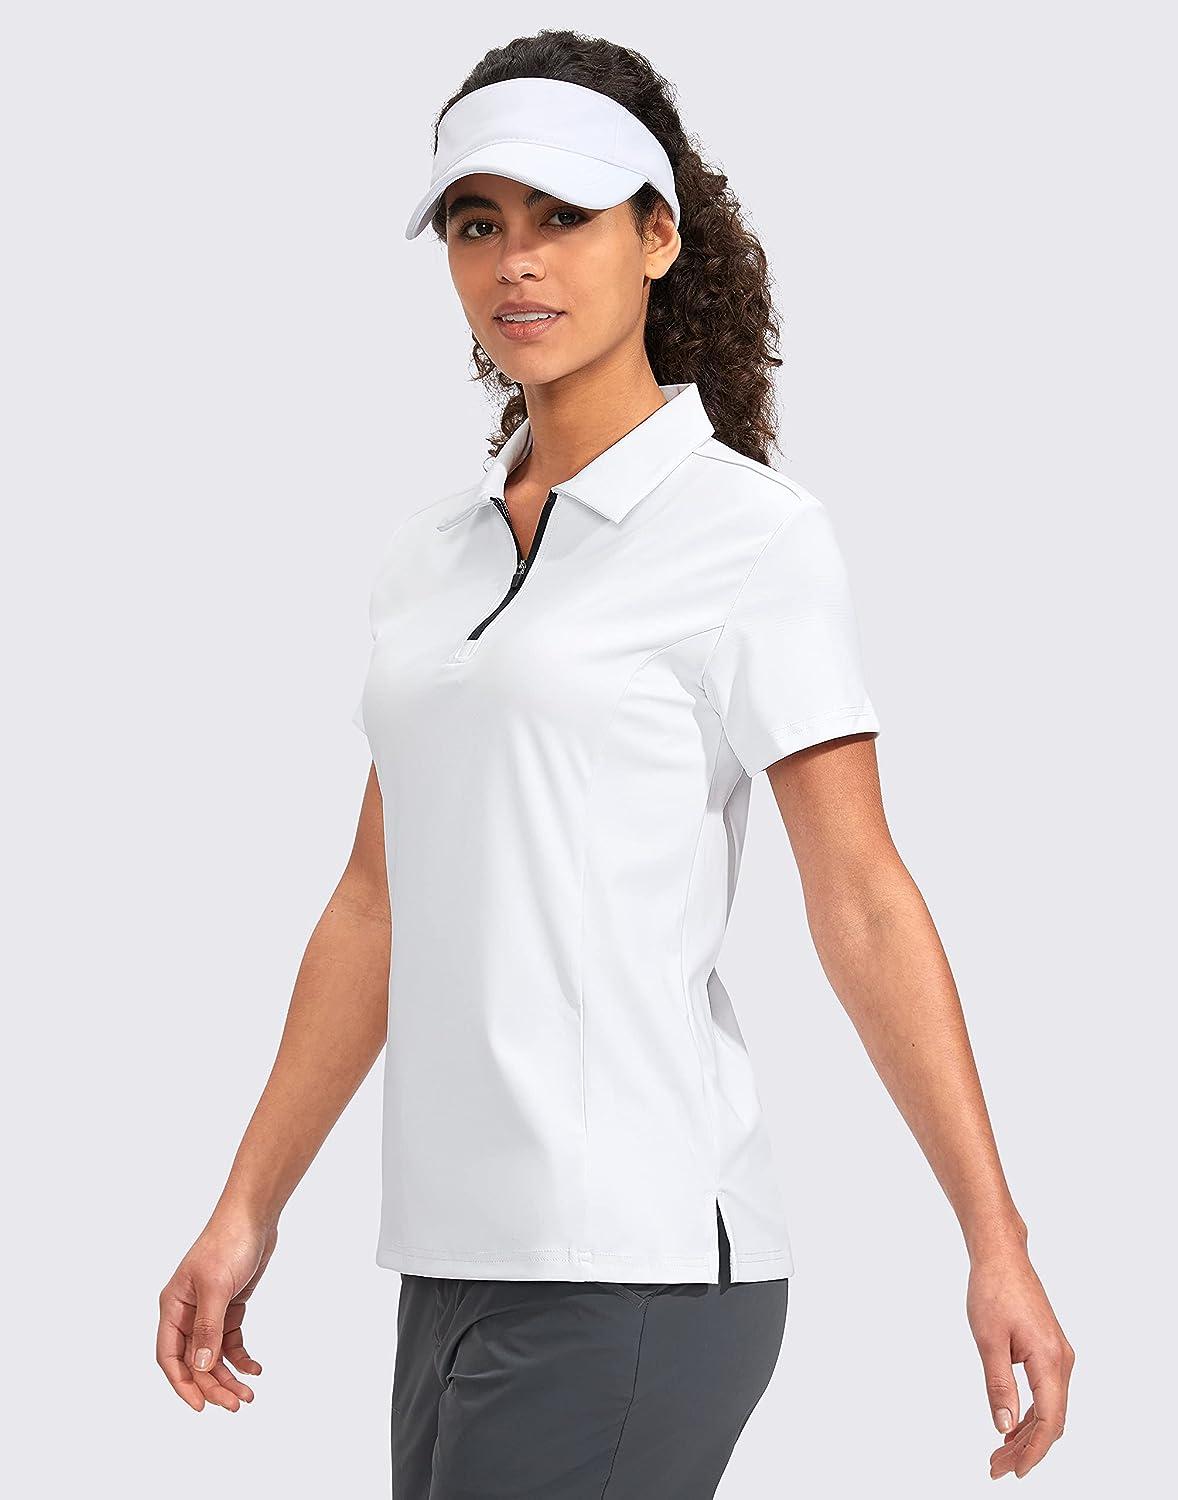 Viodia Women's Golf Shirt Short Sleeve with Zip Up Quick Dry Stretch Tennis  Collared Polo Shirts for Women Golf Clothes Large White